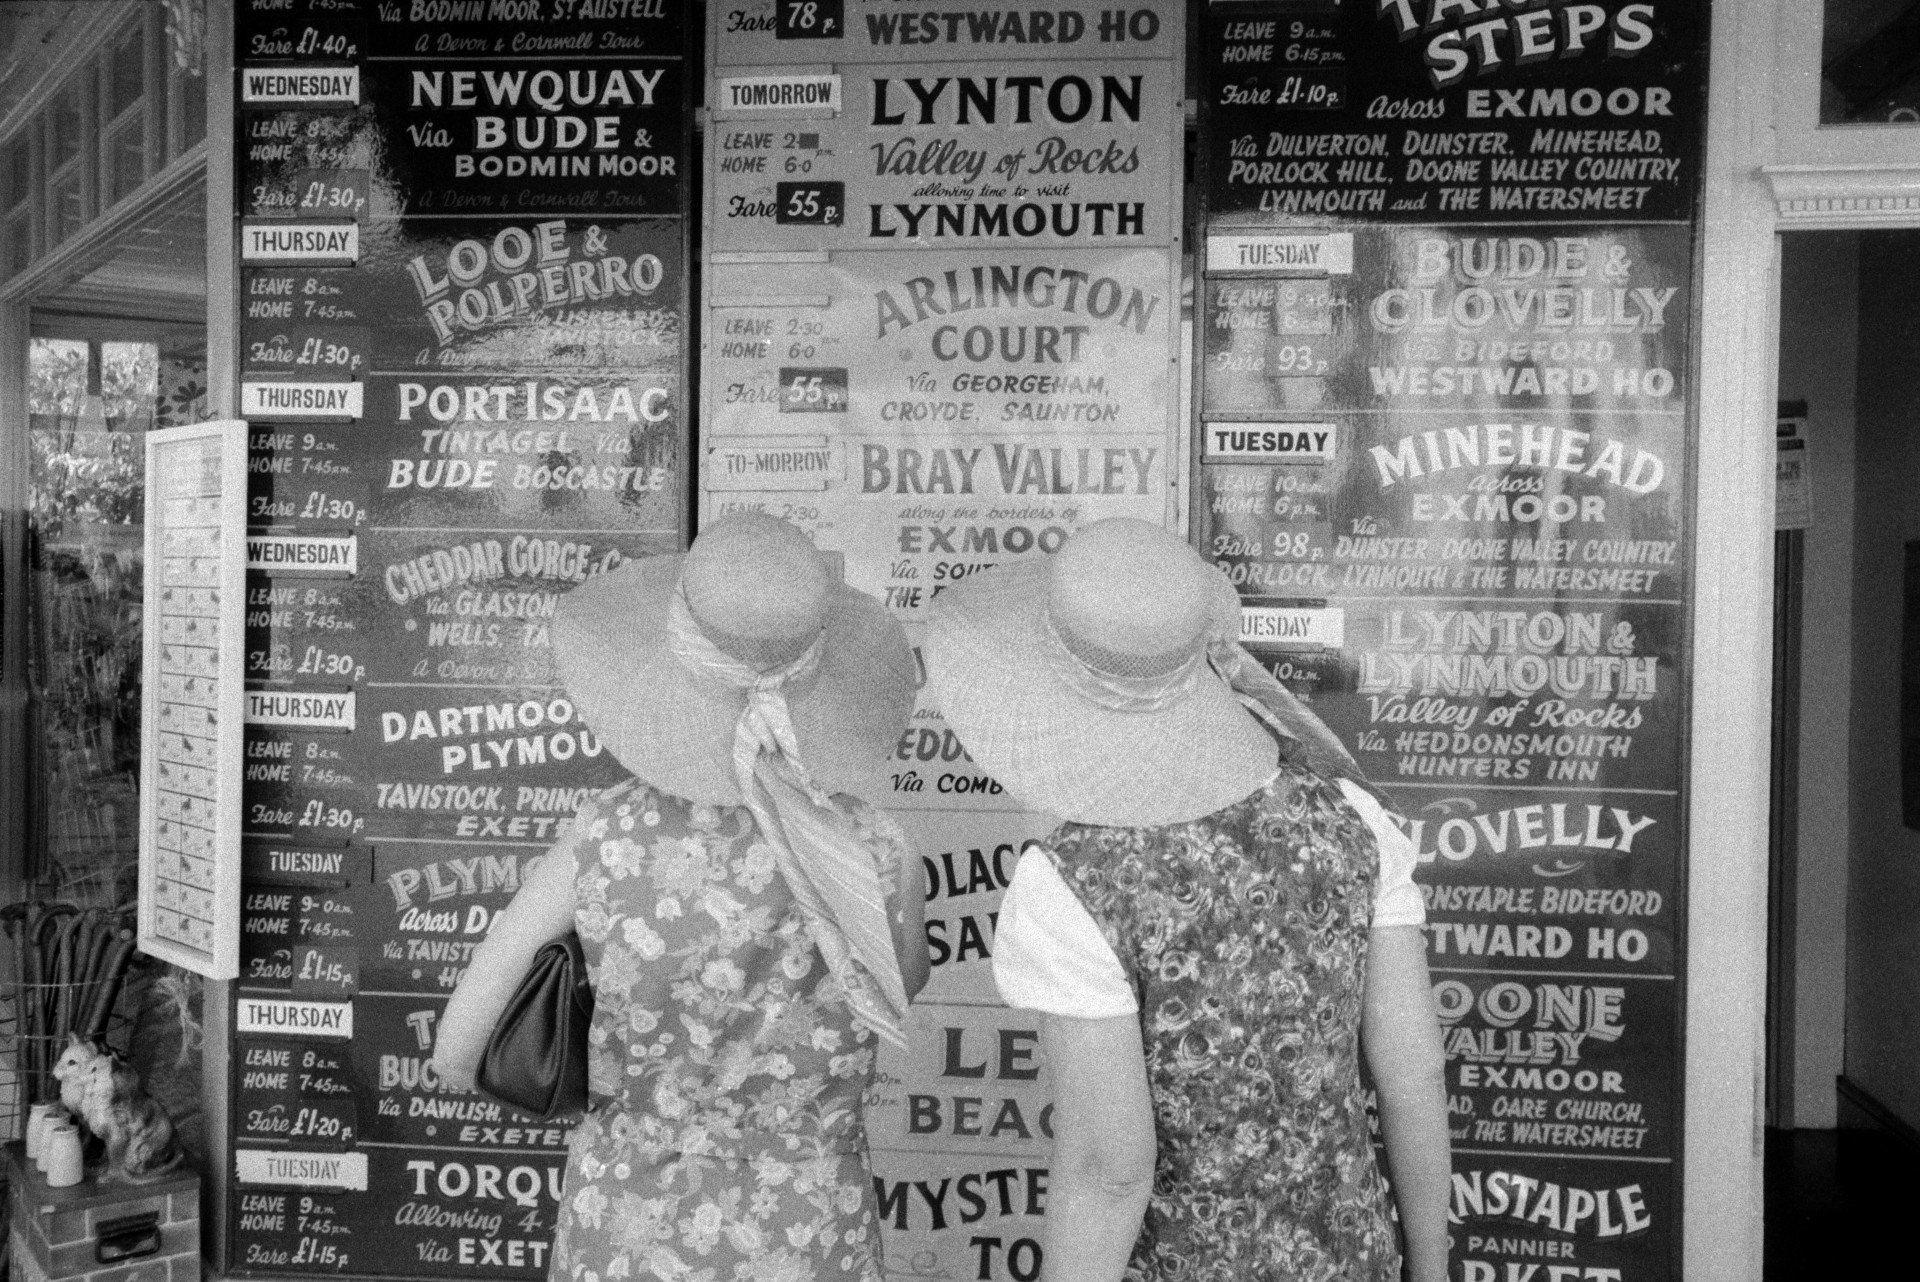 Two women wearing summer dresses and hats looking at the adverts for boat trips at Ilfracombe.